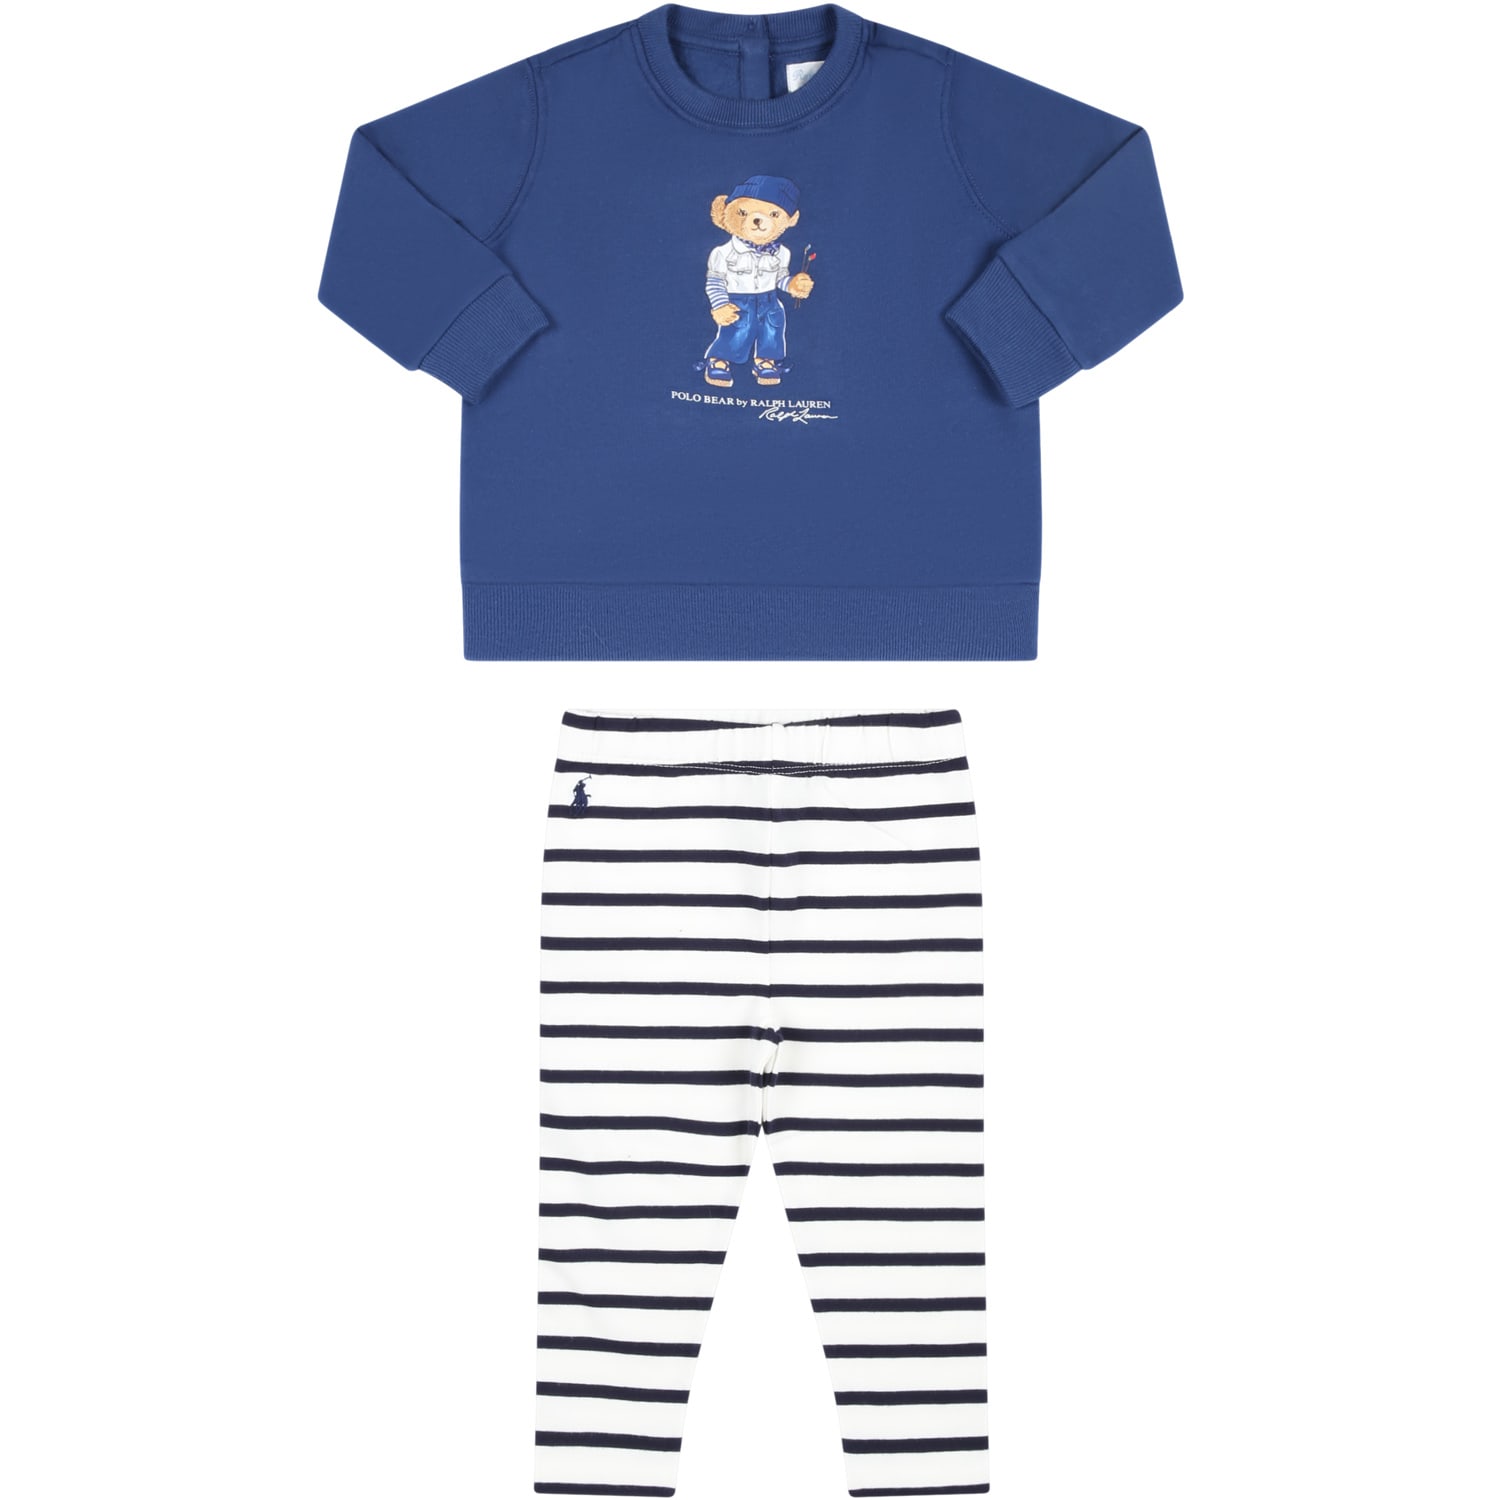 RALPH LAUREN MULTICOLOR SET FOR BABY GIRL WITH POLO BEAR